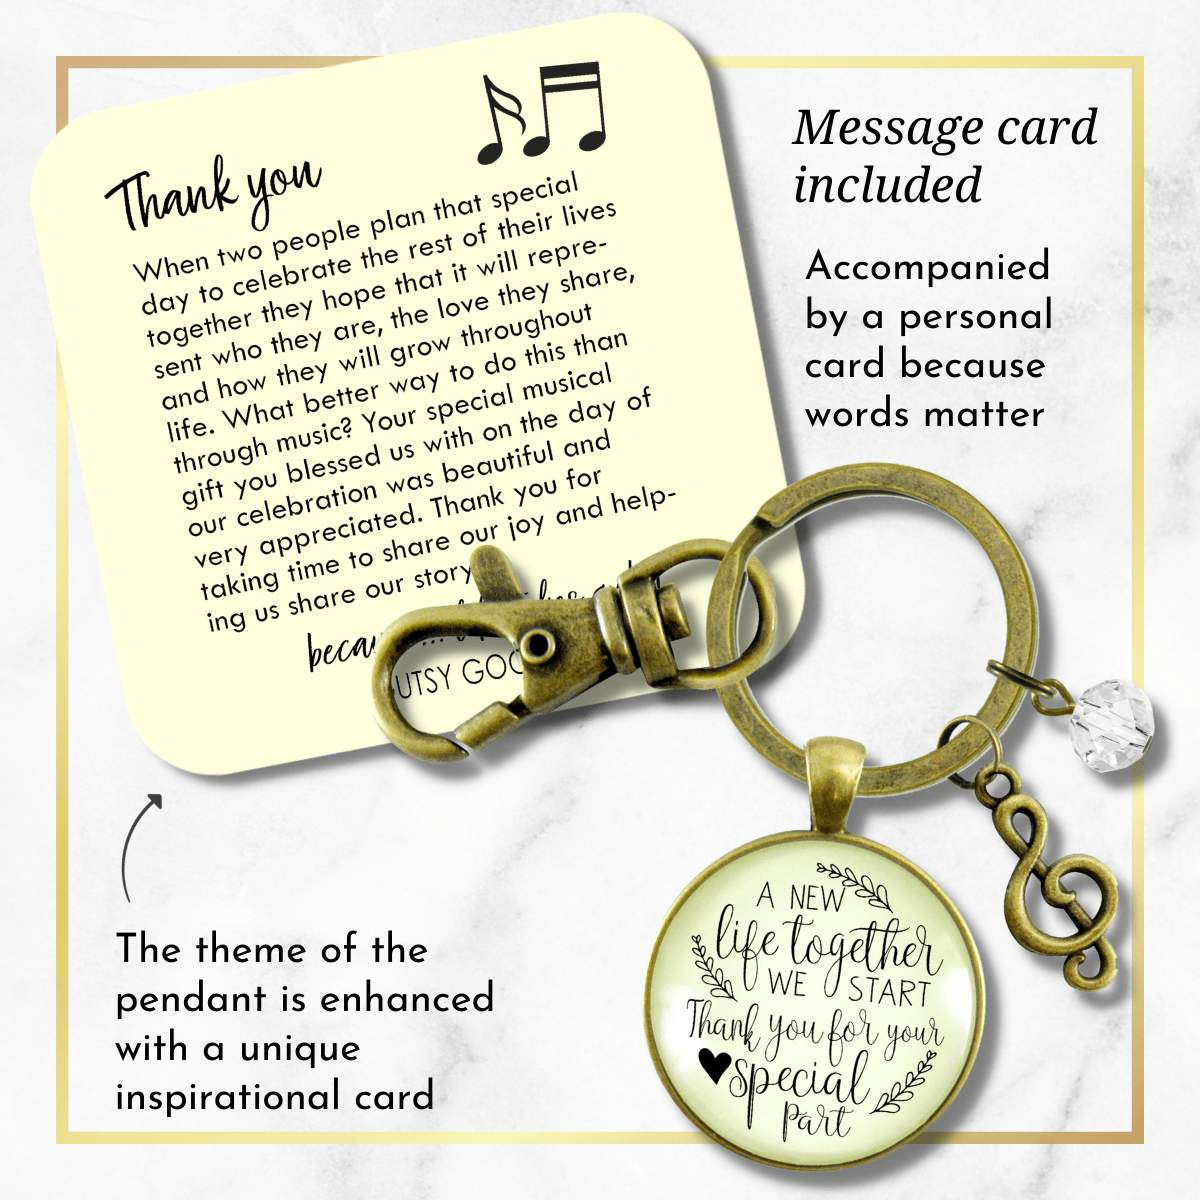 Wedding Singer Gift Keychain A New Life We Start Rustic For Musician Soloist G Clef Thank You - Gutsy Goodness Handmade Jewelry;Wedding Singer Gift Keychain A New Life We Start Rustic For Musician Soloist G Clef Thank You - Gutsy Goodness Handmade Jewelry Gifts